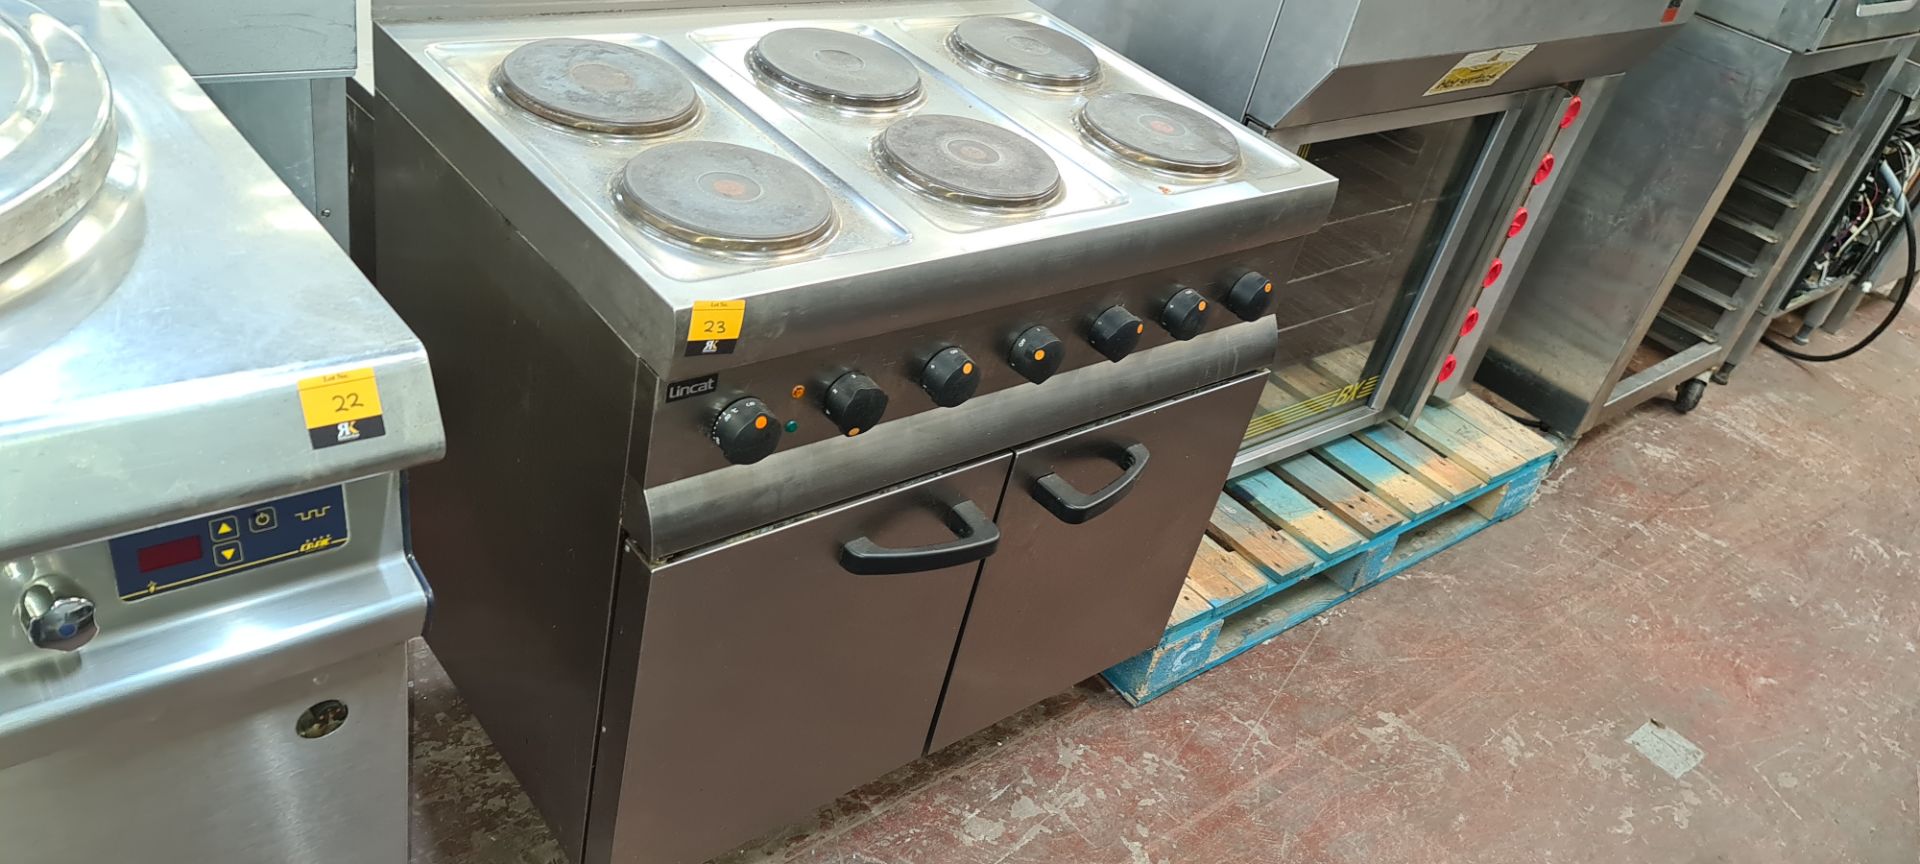 Lincat stainless steel electric 6-ring oven model ESLR9C - Image 2 of 6